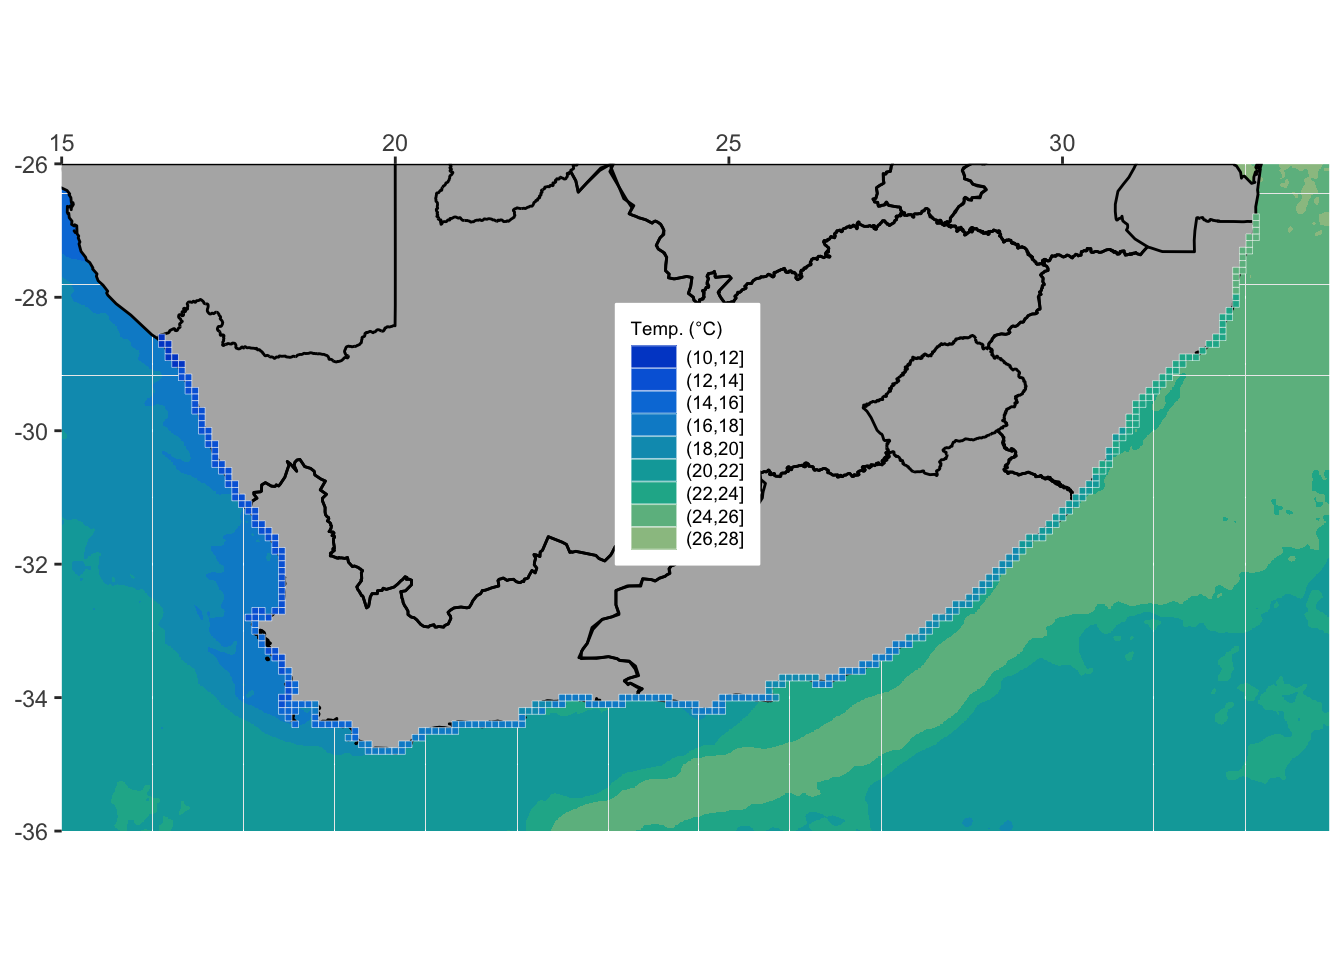 The cleaned up map of South Africa. Resplendent with coastal and ocean temperatures (°C).